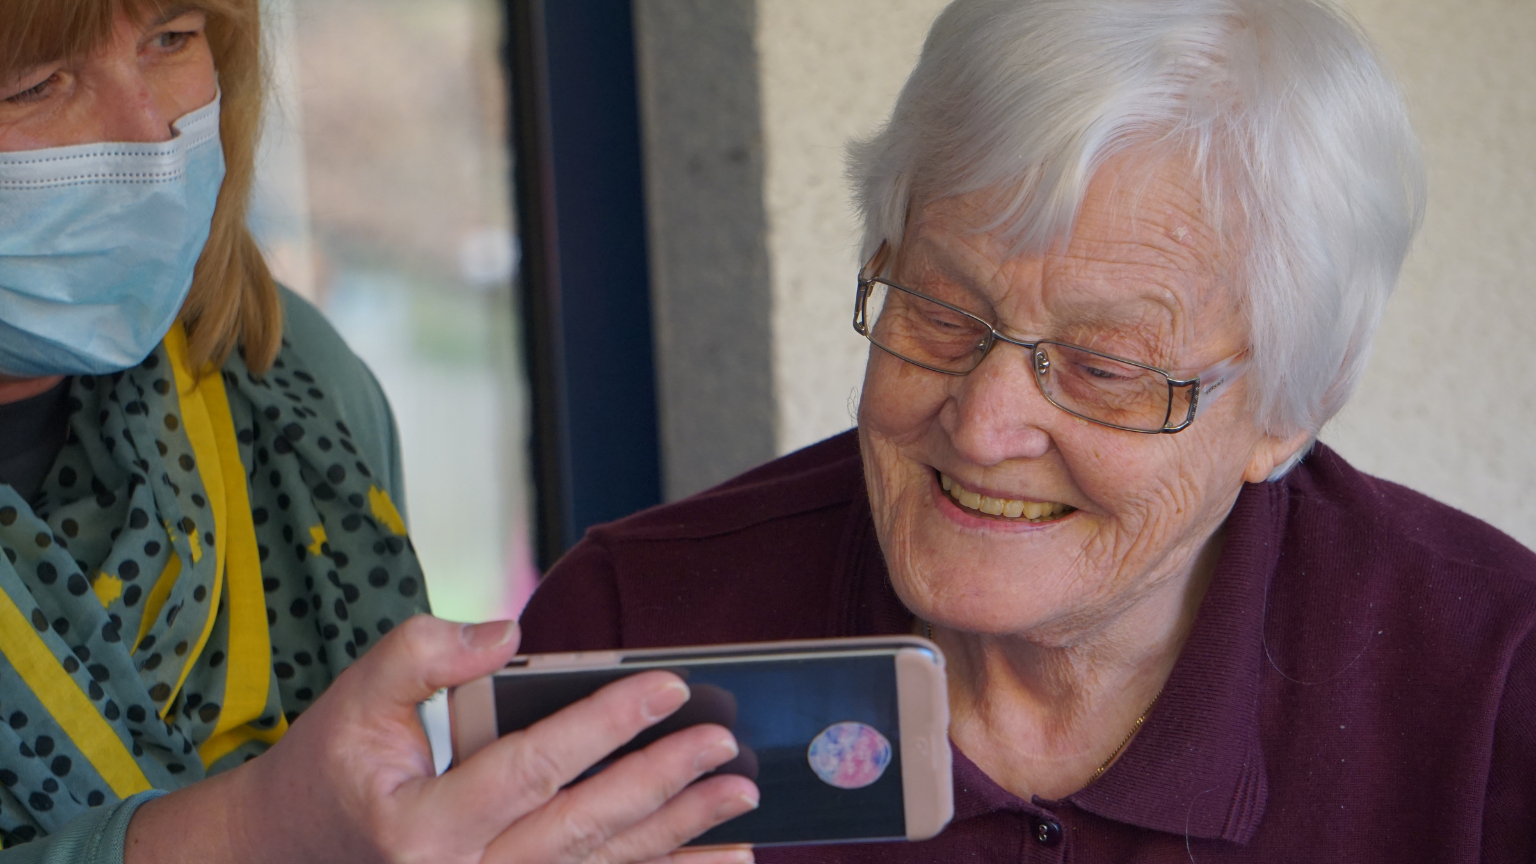 woman showing an elderly woman an app on a cell phone.